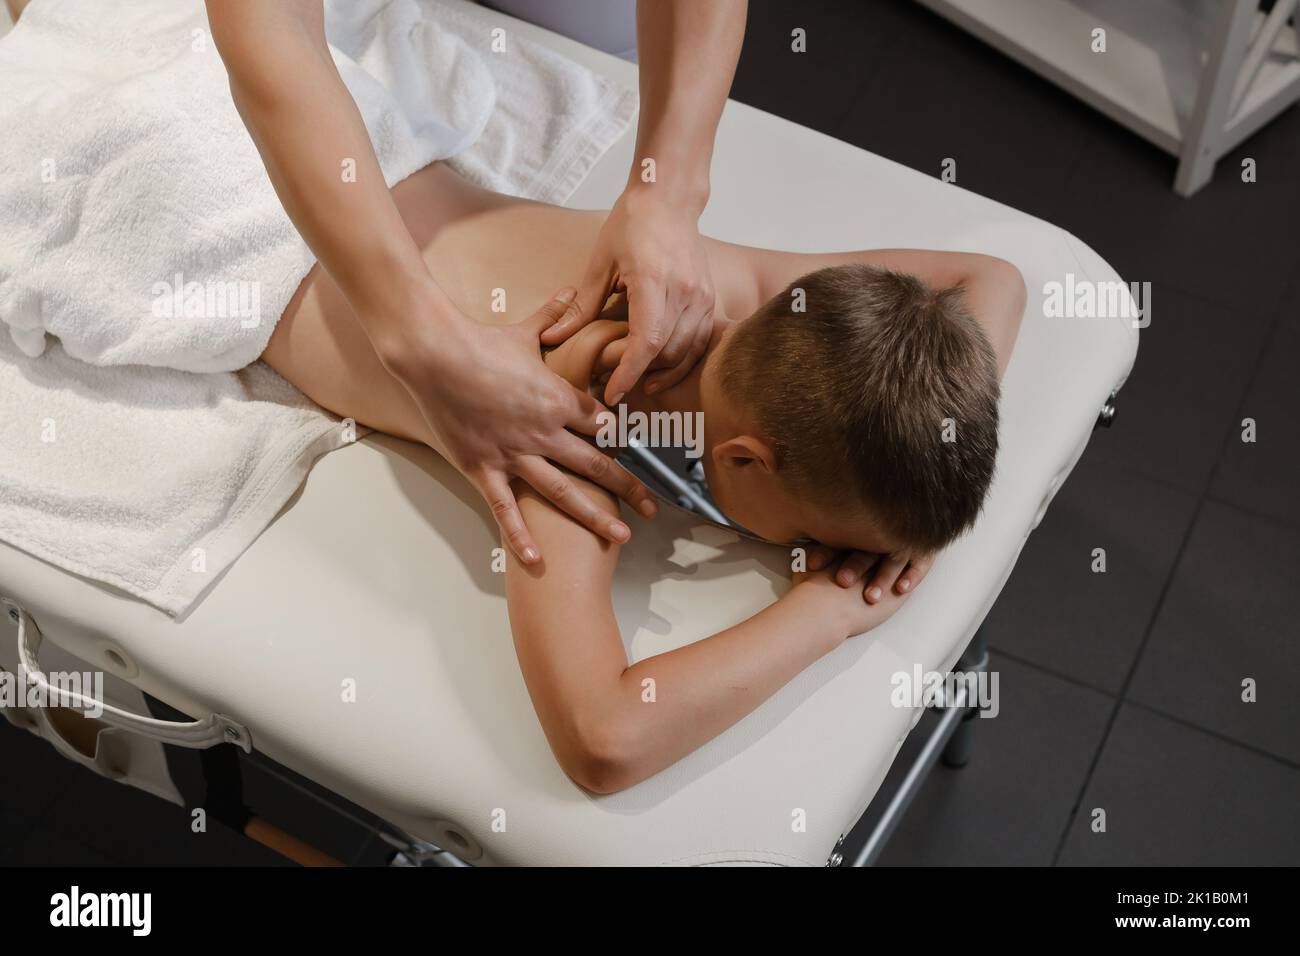 masseur gives the child a back massage. Kids massage concept. massage therapist giving 7 year old boy shoulder massage. Physical therapy Stock Photo